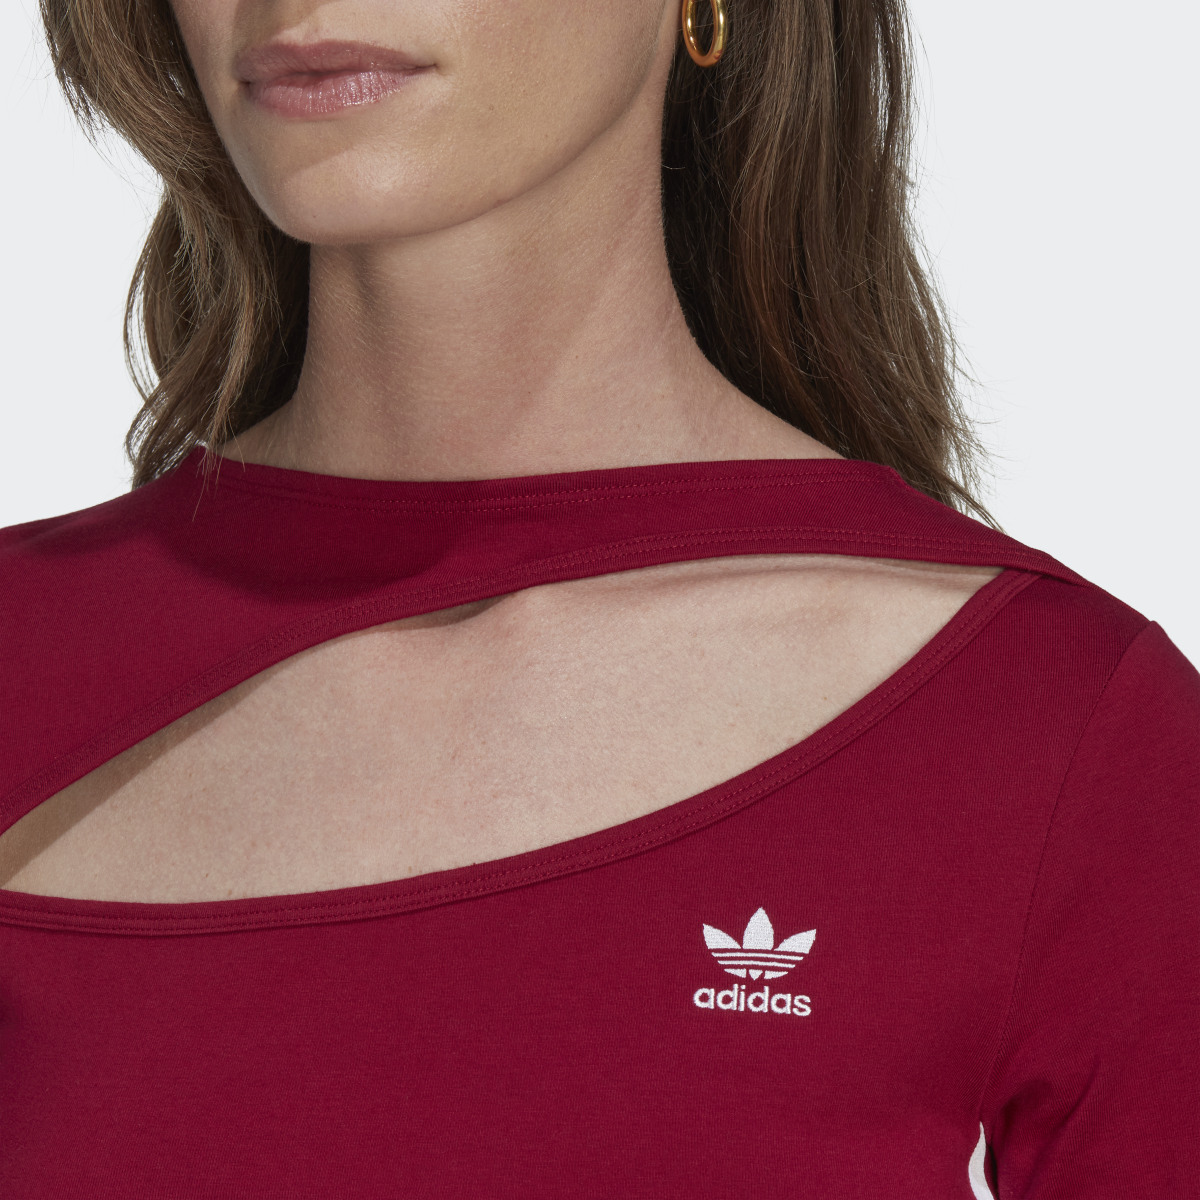 Adidas Centre Stage Cutout Top. 6